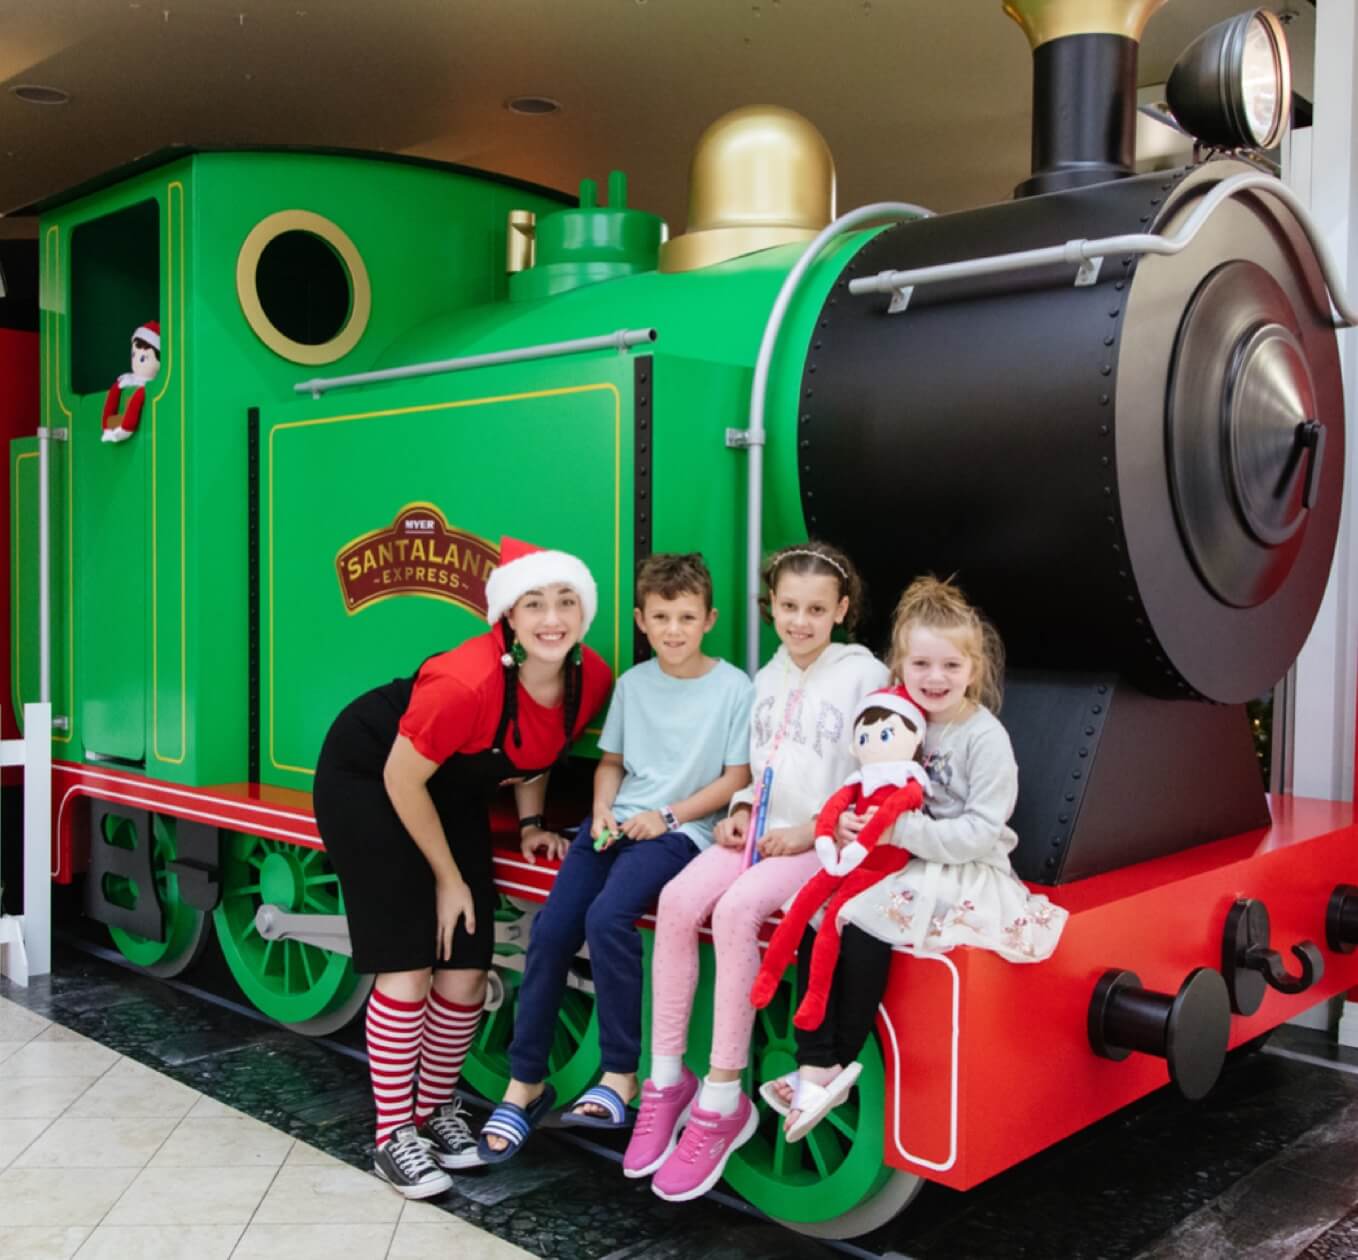 All Aboard The Santaland Express